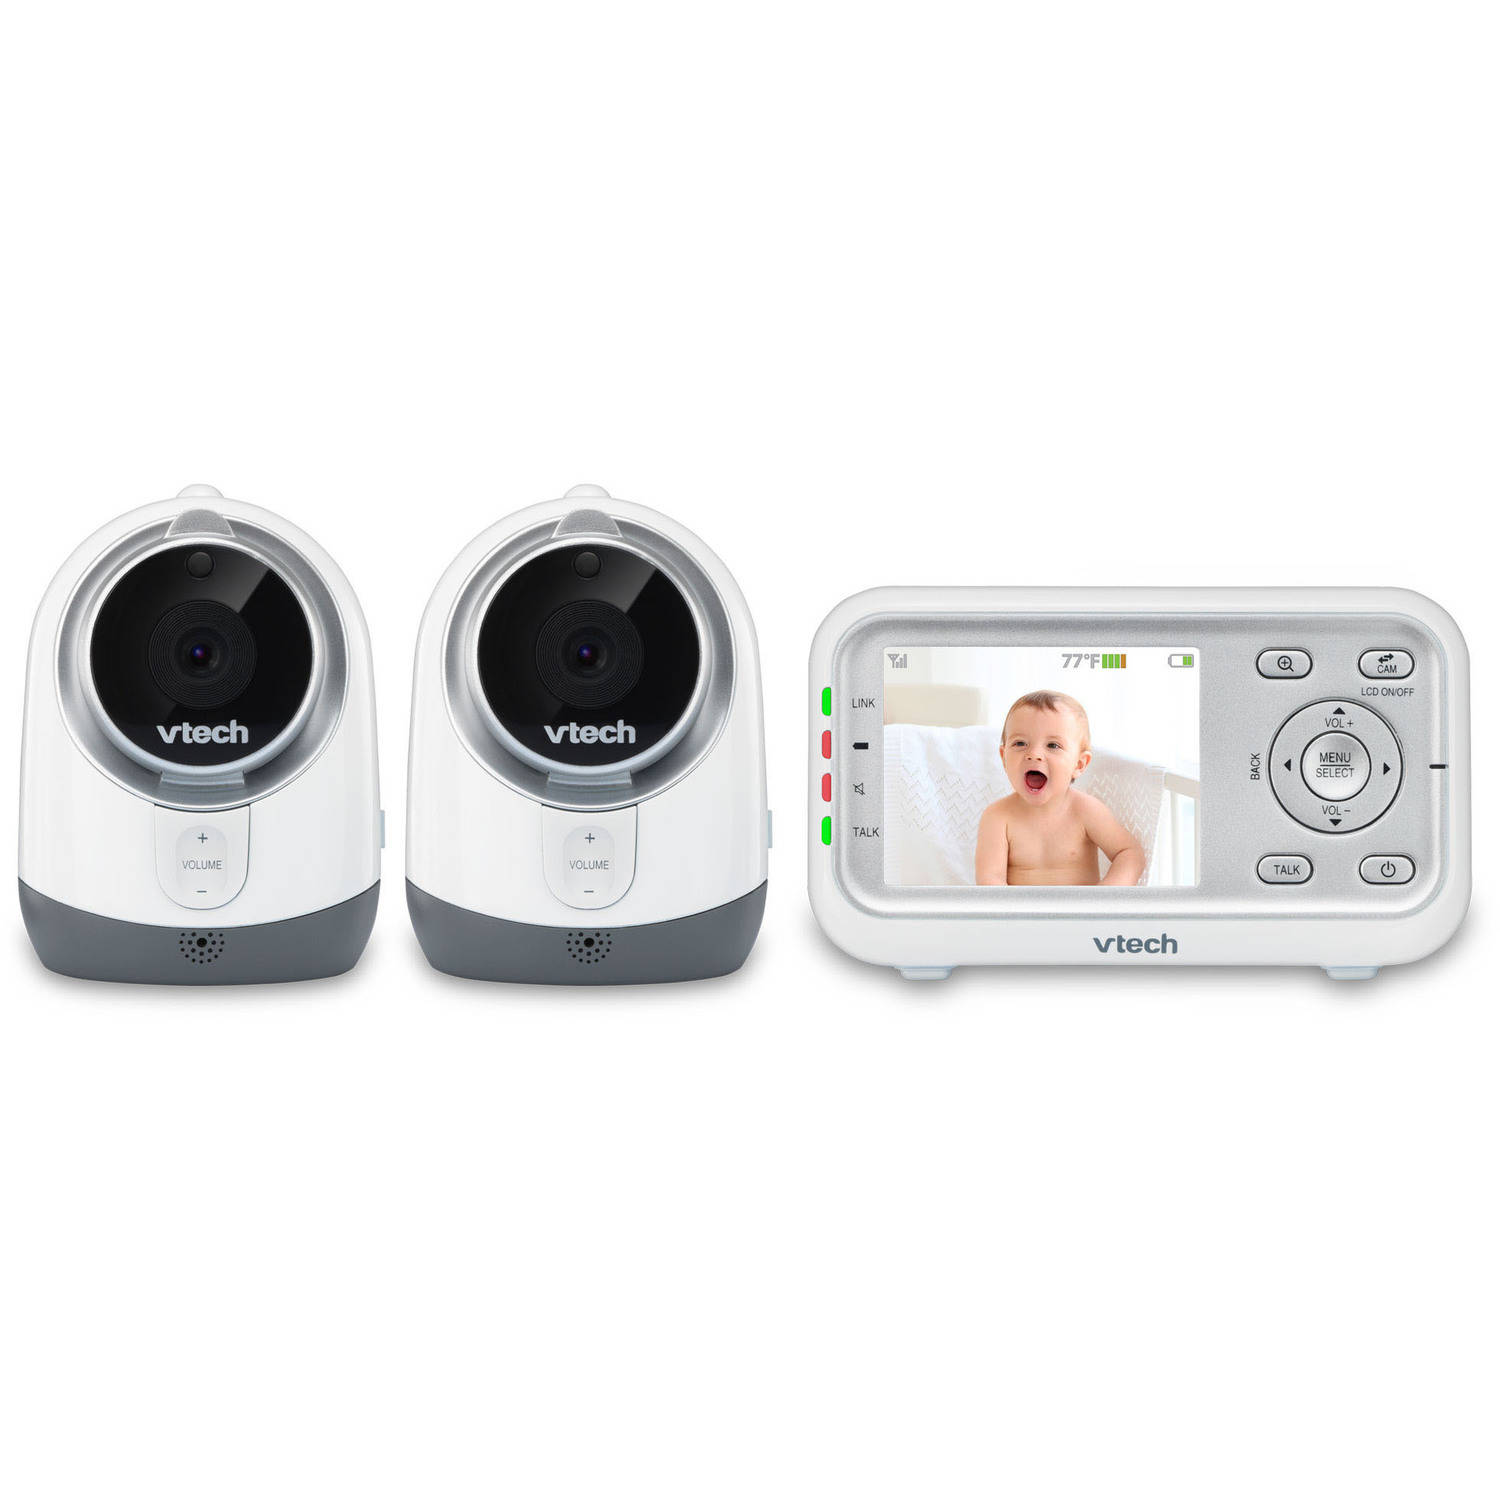 VTech VM3251-2 Expandable Digital Video Baby Monitor with 2 Cameras and Automatic Night Vision